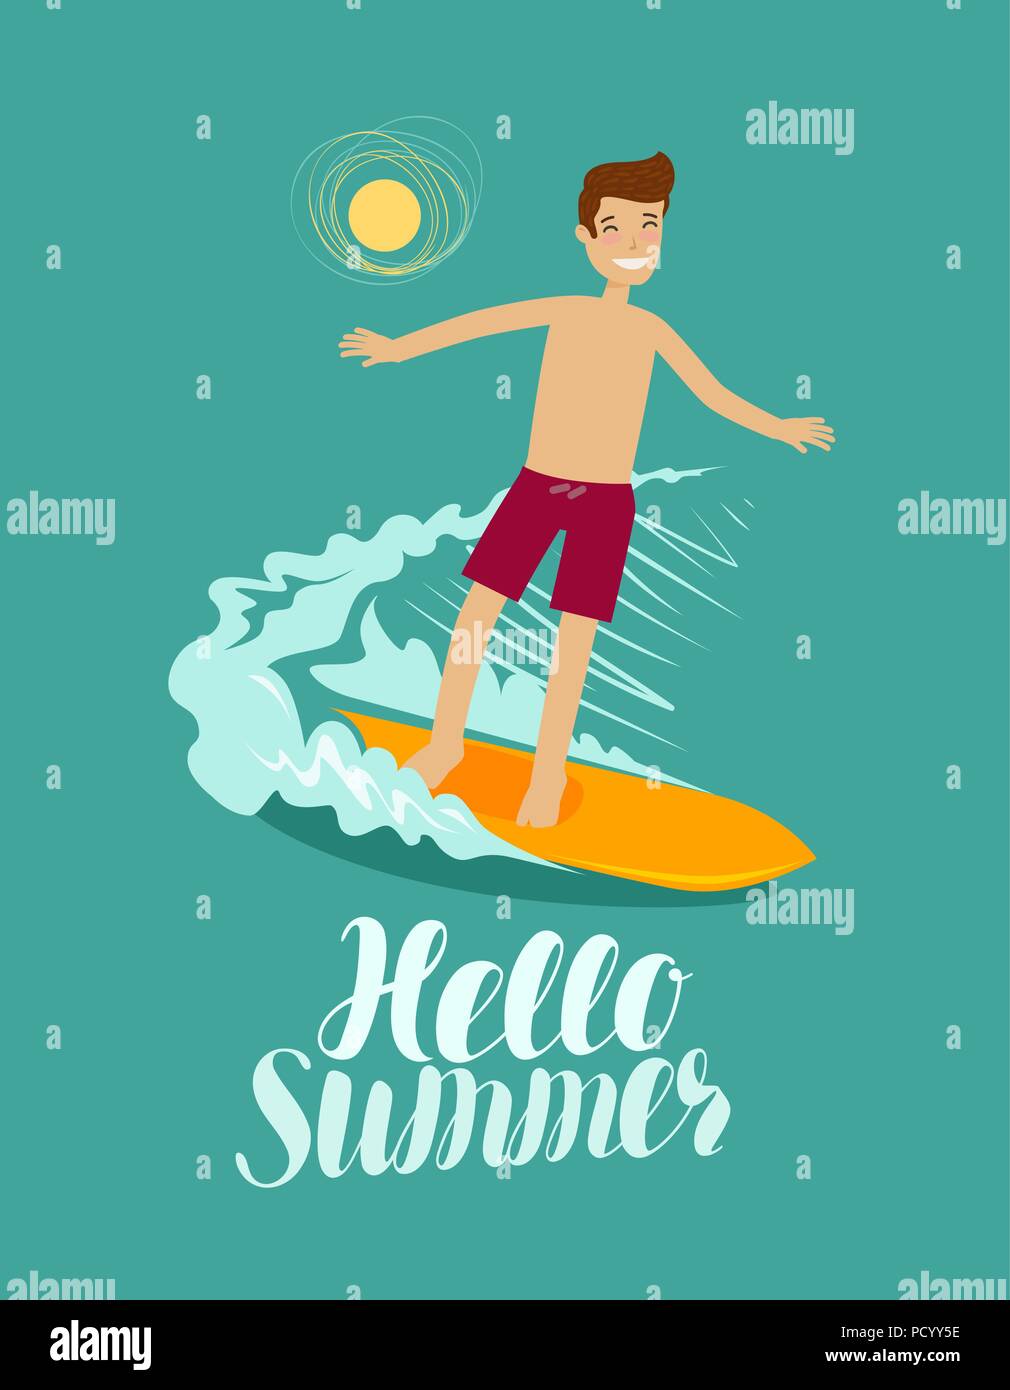 Hello summer, banner. Surfer and wave. Surfing vector illustration Stock Vector